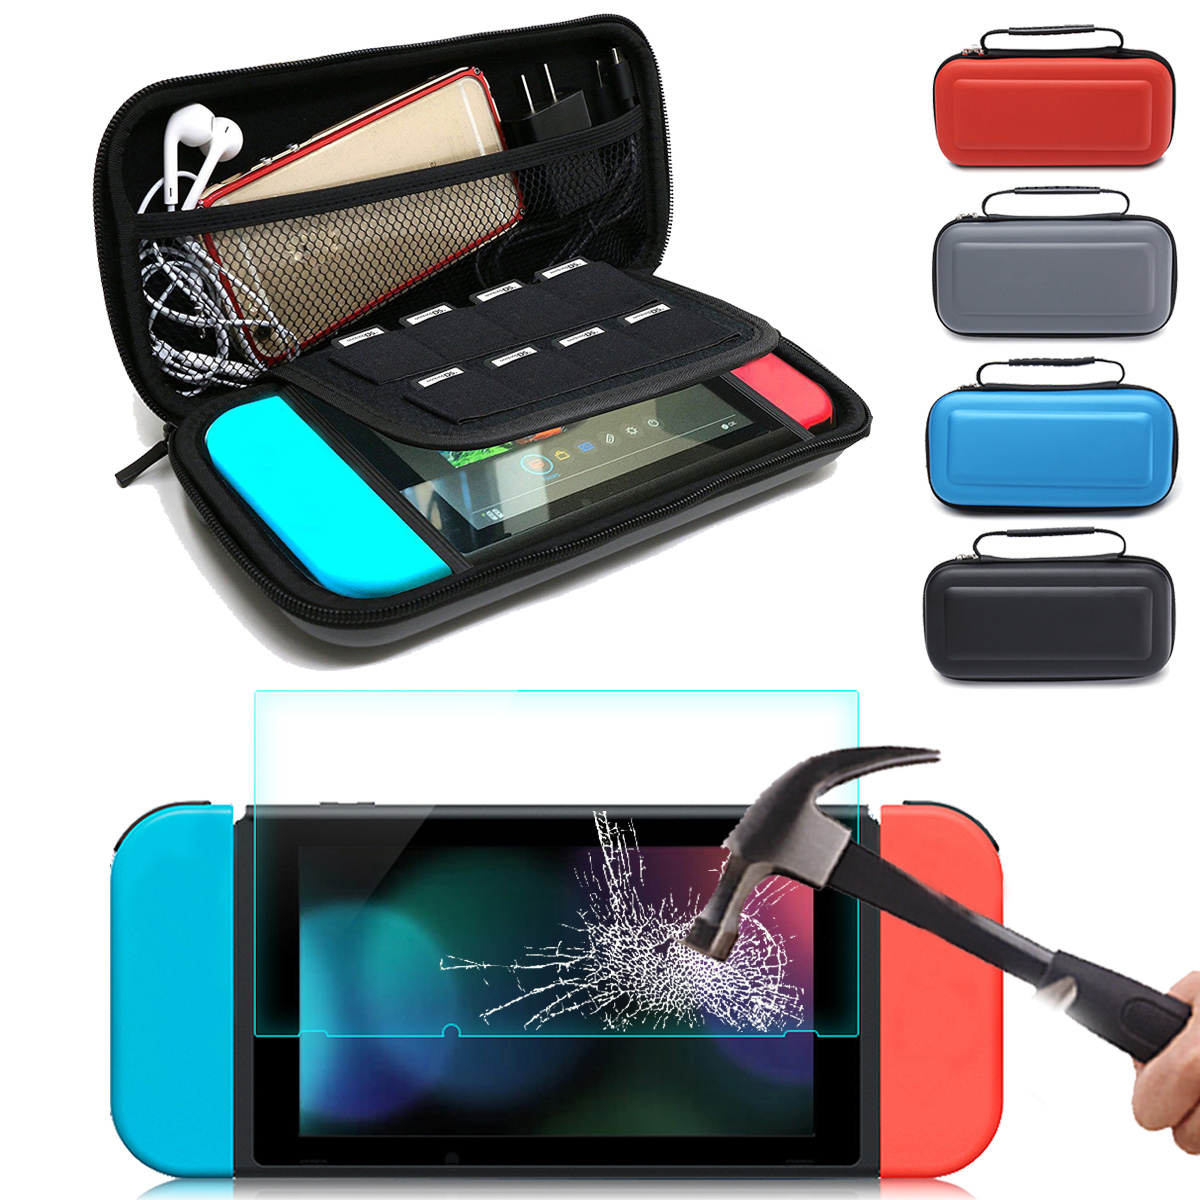 Durable-EVA-Shockproof-Game-Console-Travel-Bag-Carry-Case--Tempered-Glass-Screen-Protector-Film-For--1713997-1